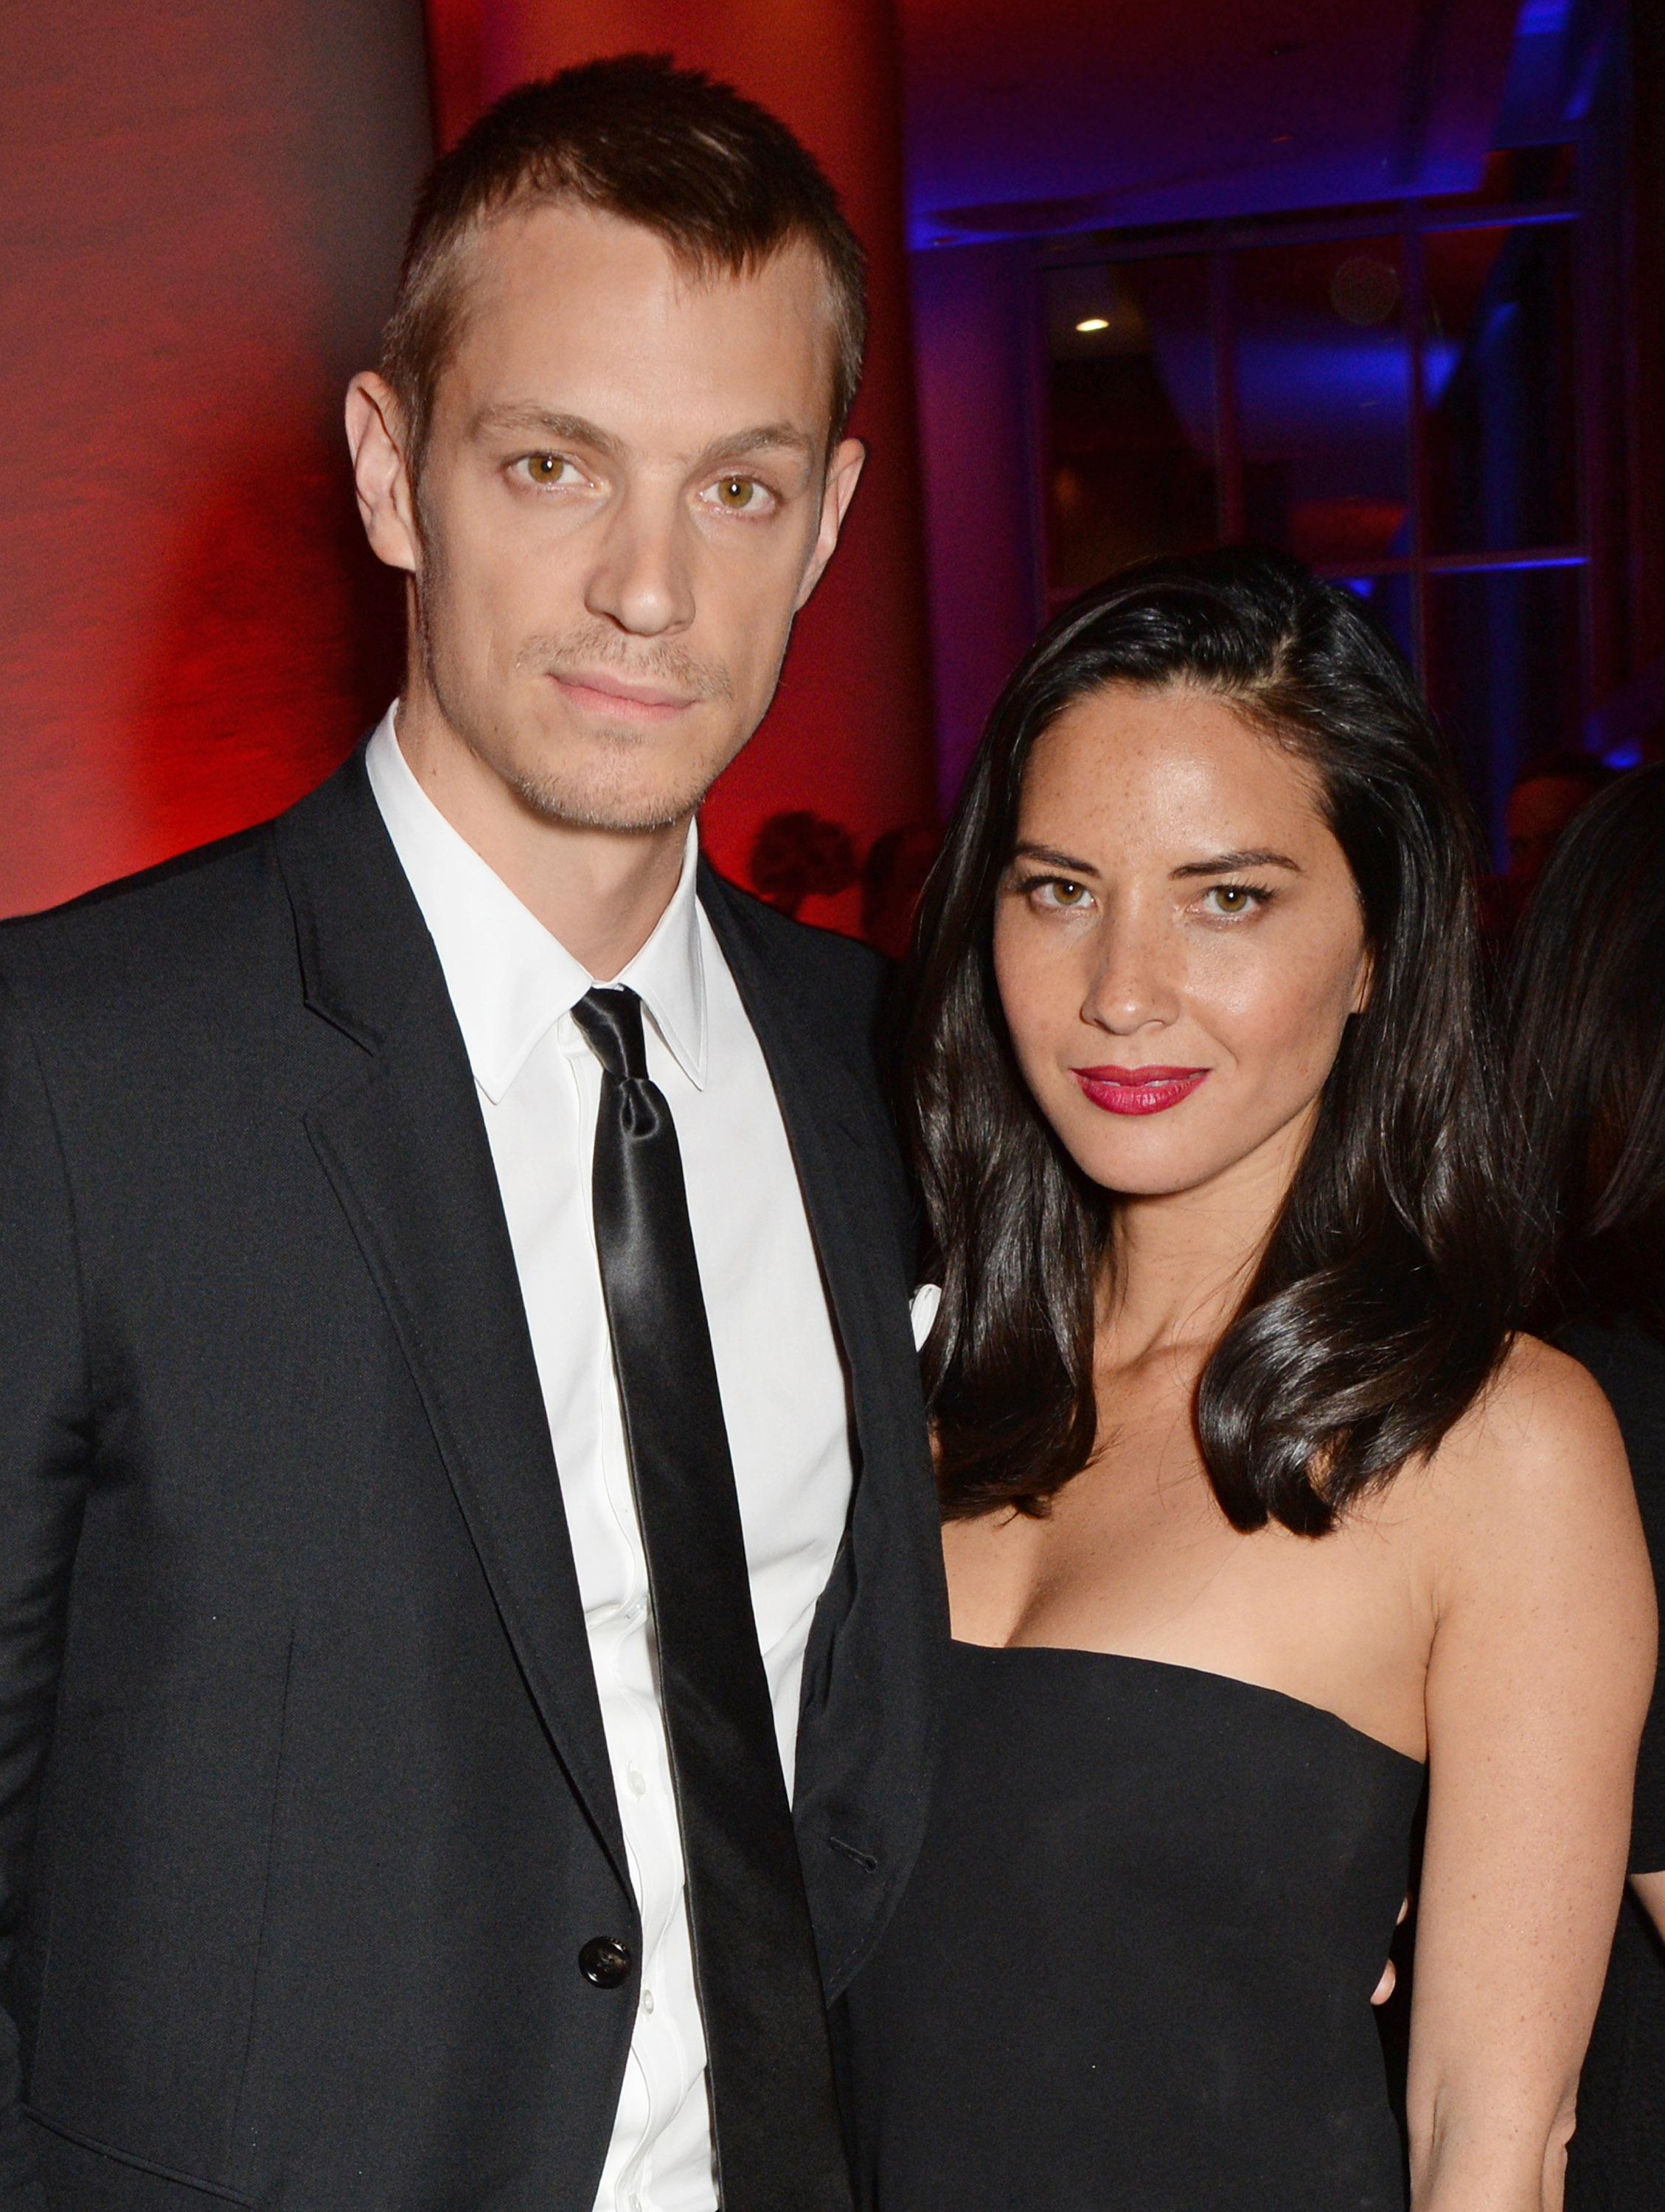 Joel Kinnaman and Olivia Munn pose for a picture at the after party of the world premiere of RoboCop in 2014